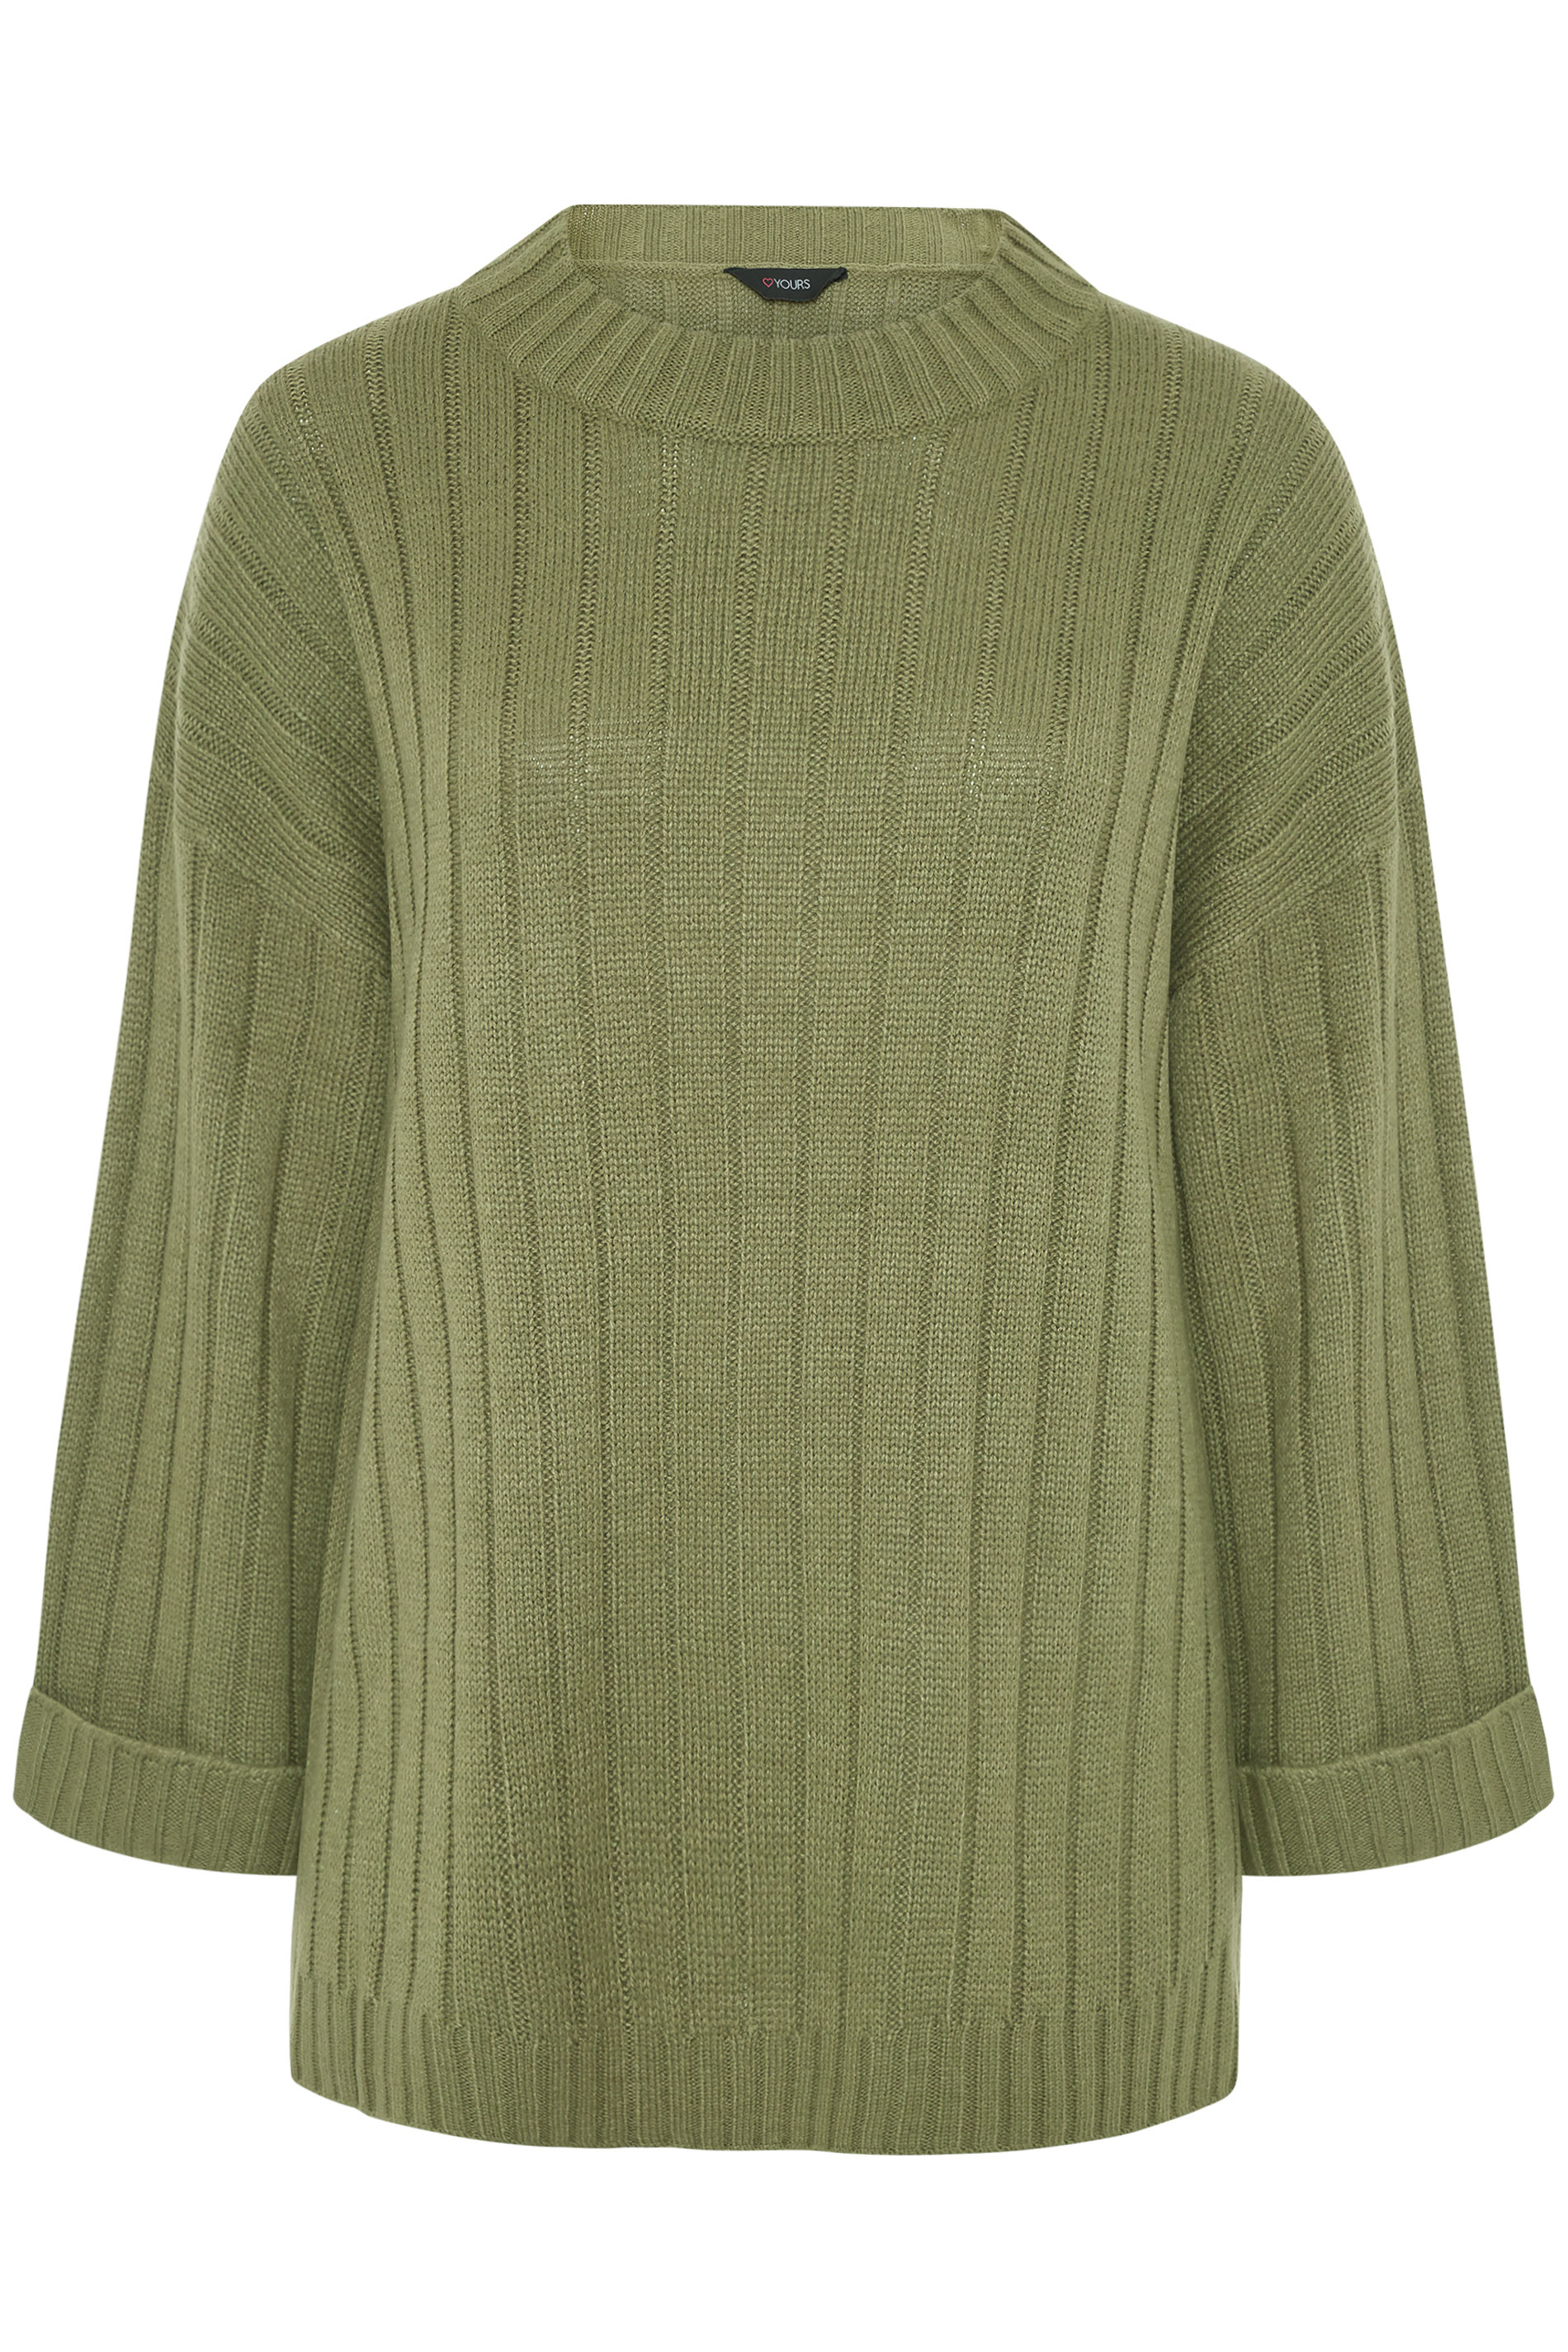 Khaki Ribbed Wide Sleeve Knitted Jumper | Yours Clothing